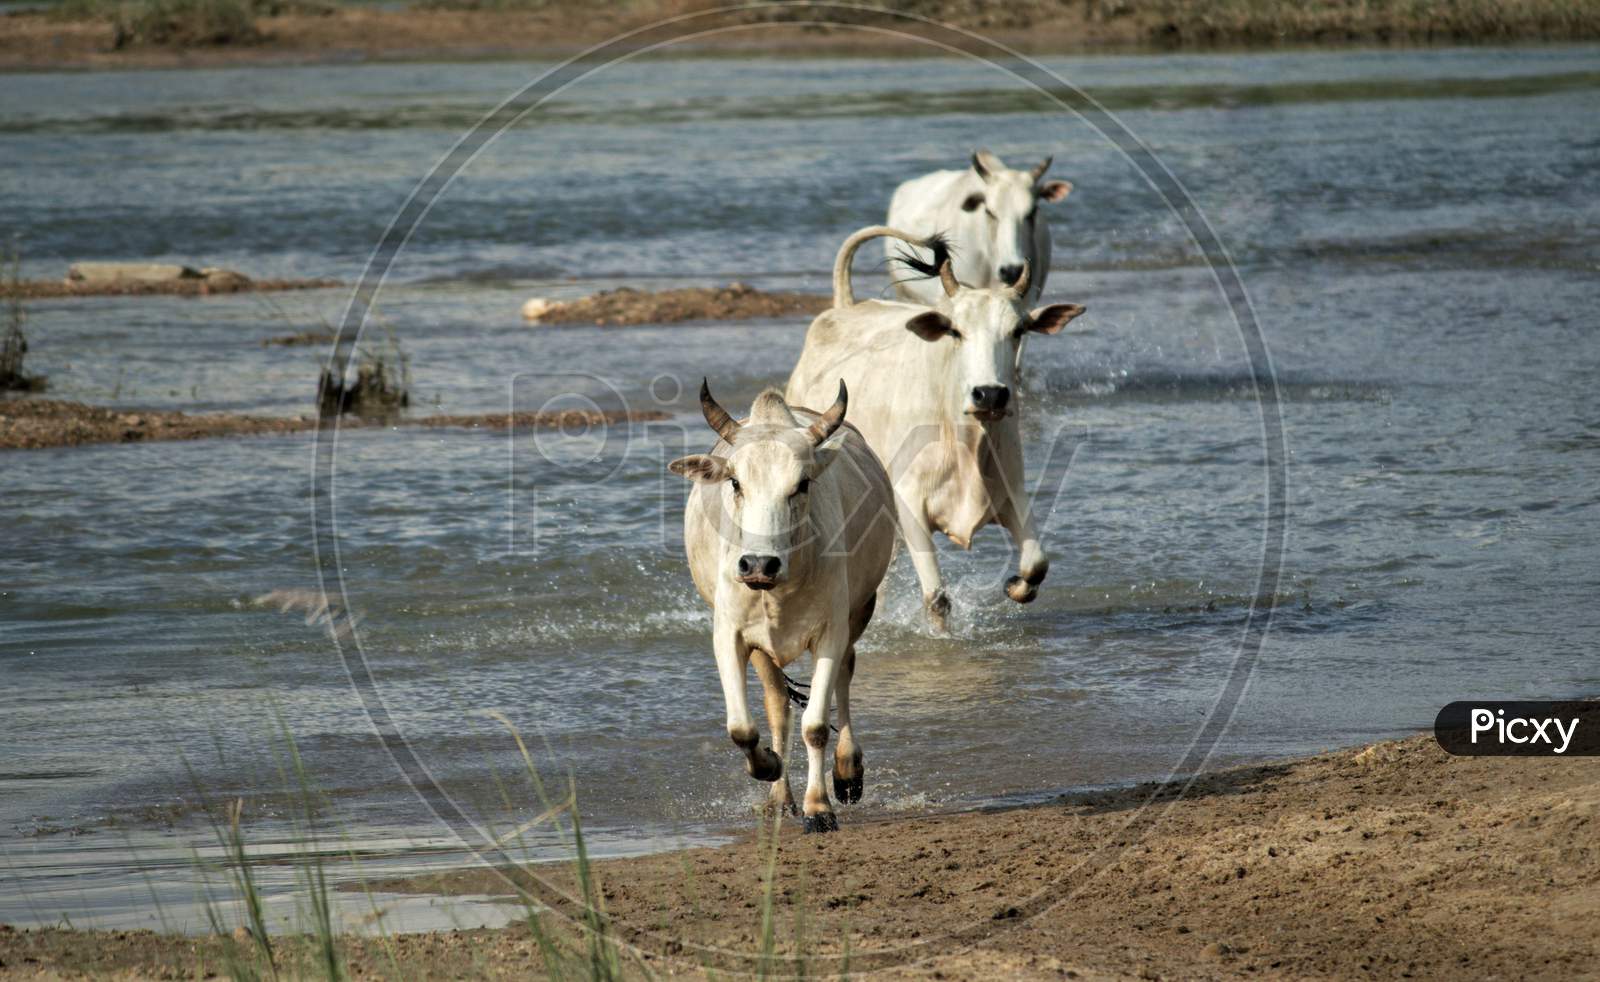 Bulls Running Through River Water To Cross,  Indian Countryside Beauty, Perfect For Wallpaper